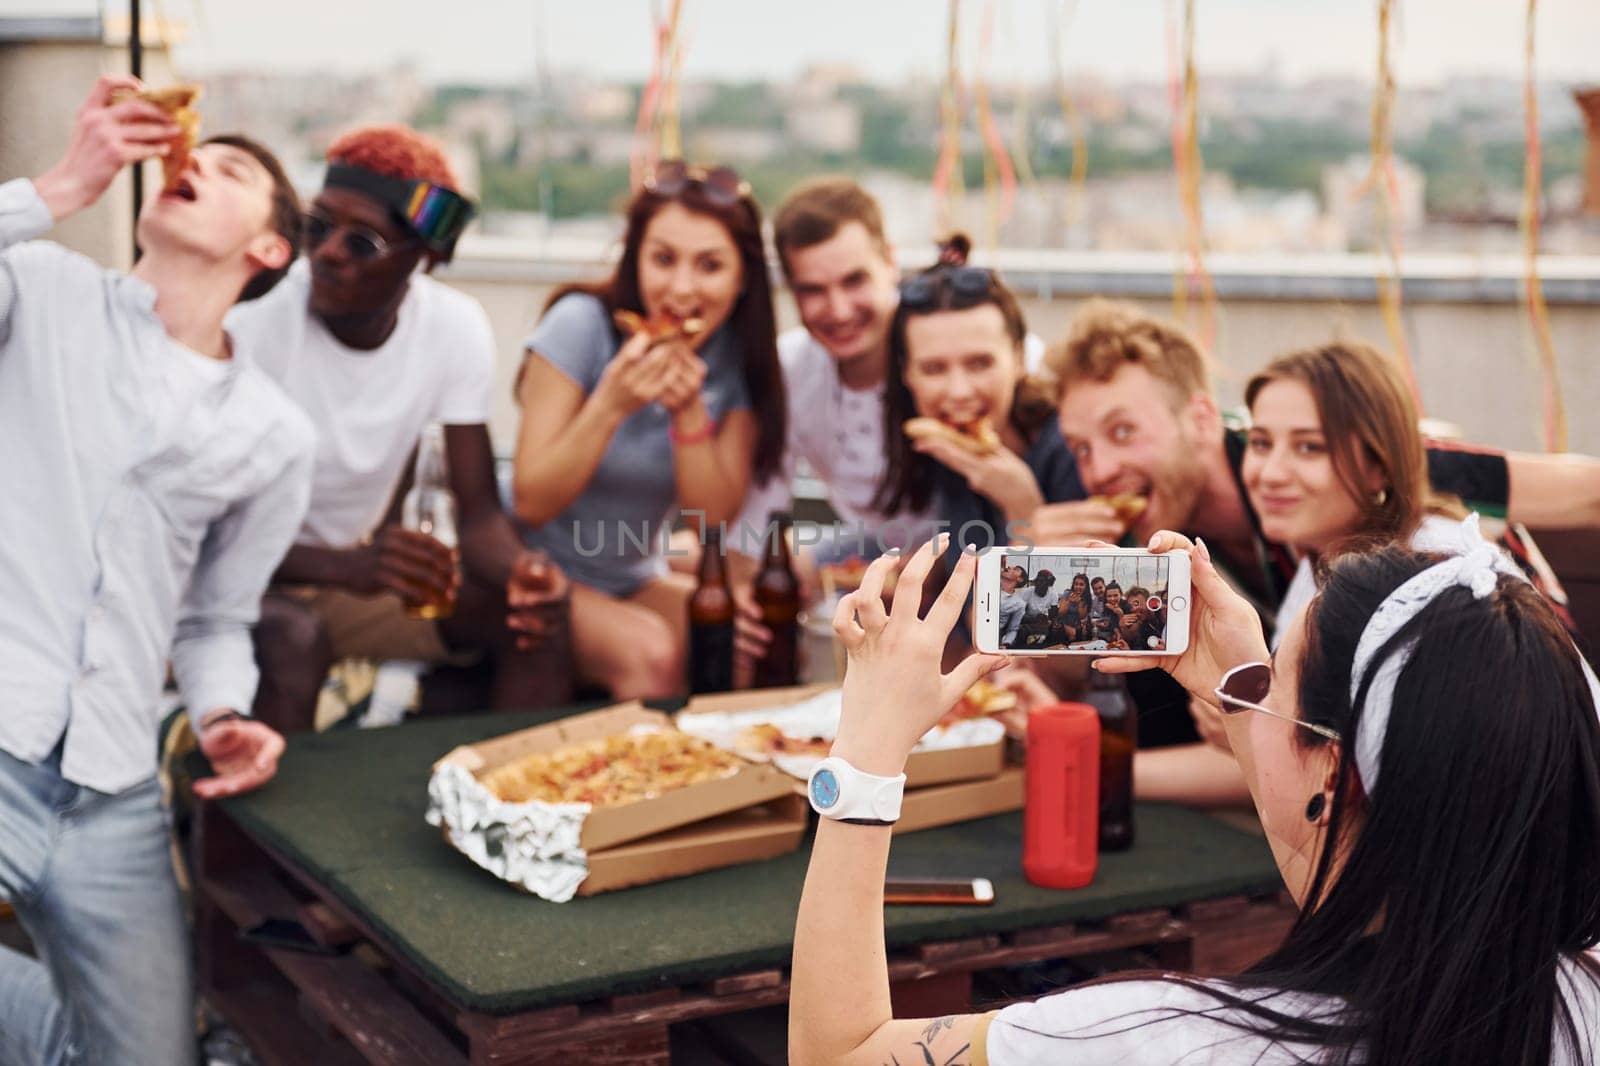 With delicious pizza. Group of young people in casual clothes have a party at rooftop together at daytime.